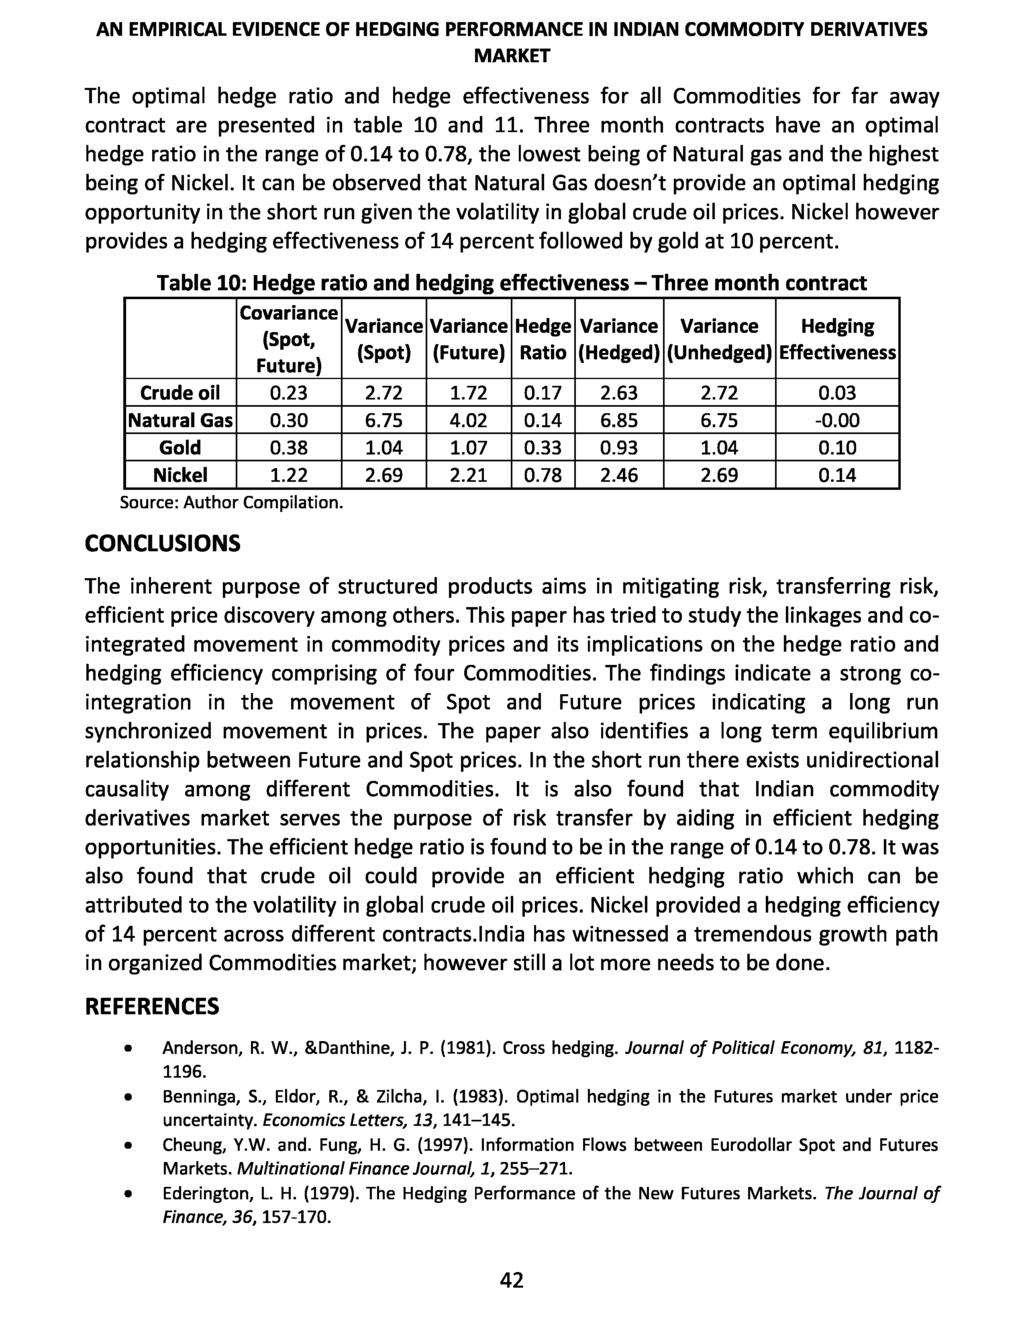 AN EMPIRICAL EVIDENCE OF HEDGING PERFORMANCE IN INDIAN COMMODITY DERIVATIVES MARKET The optimal hedge ratio and hedge effectiveness for all Commodities for far away contract are presented in table 10